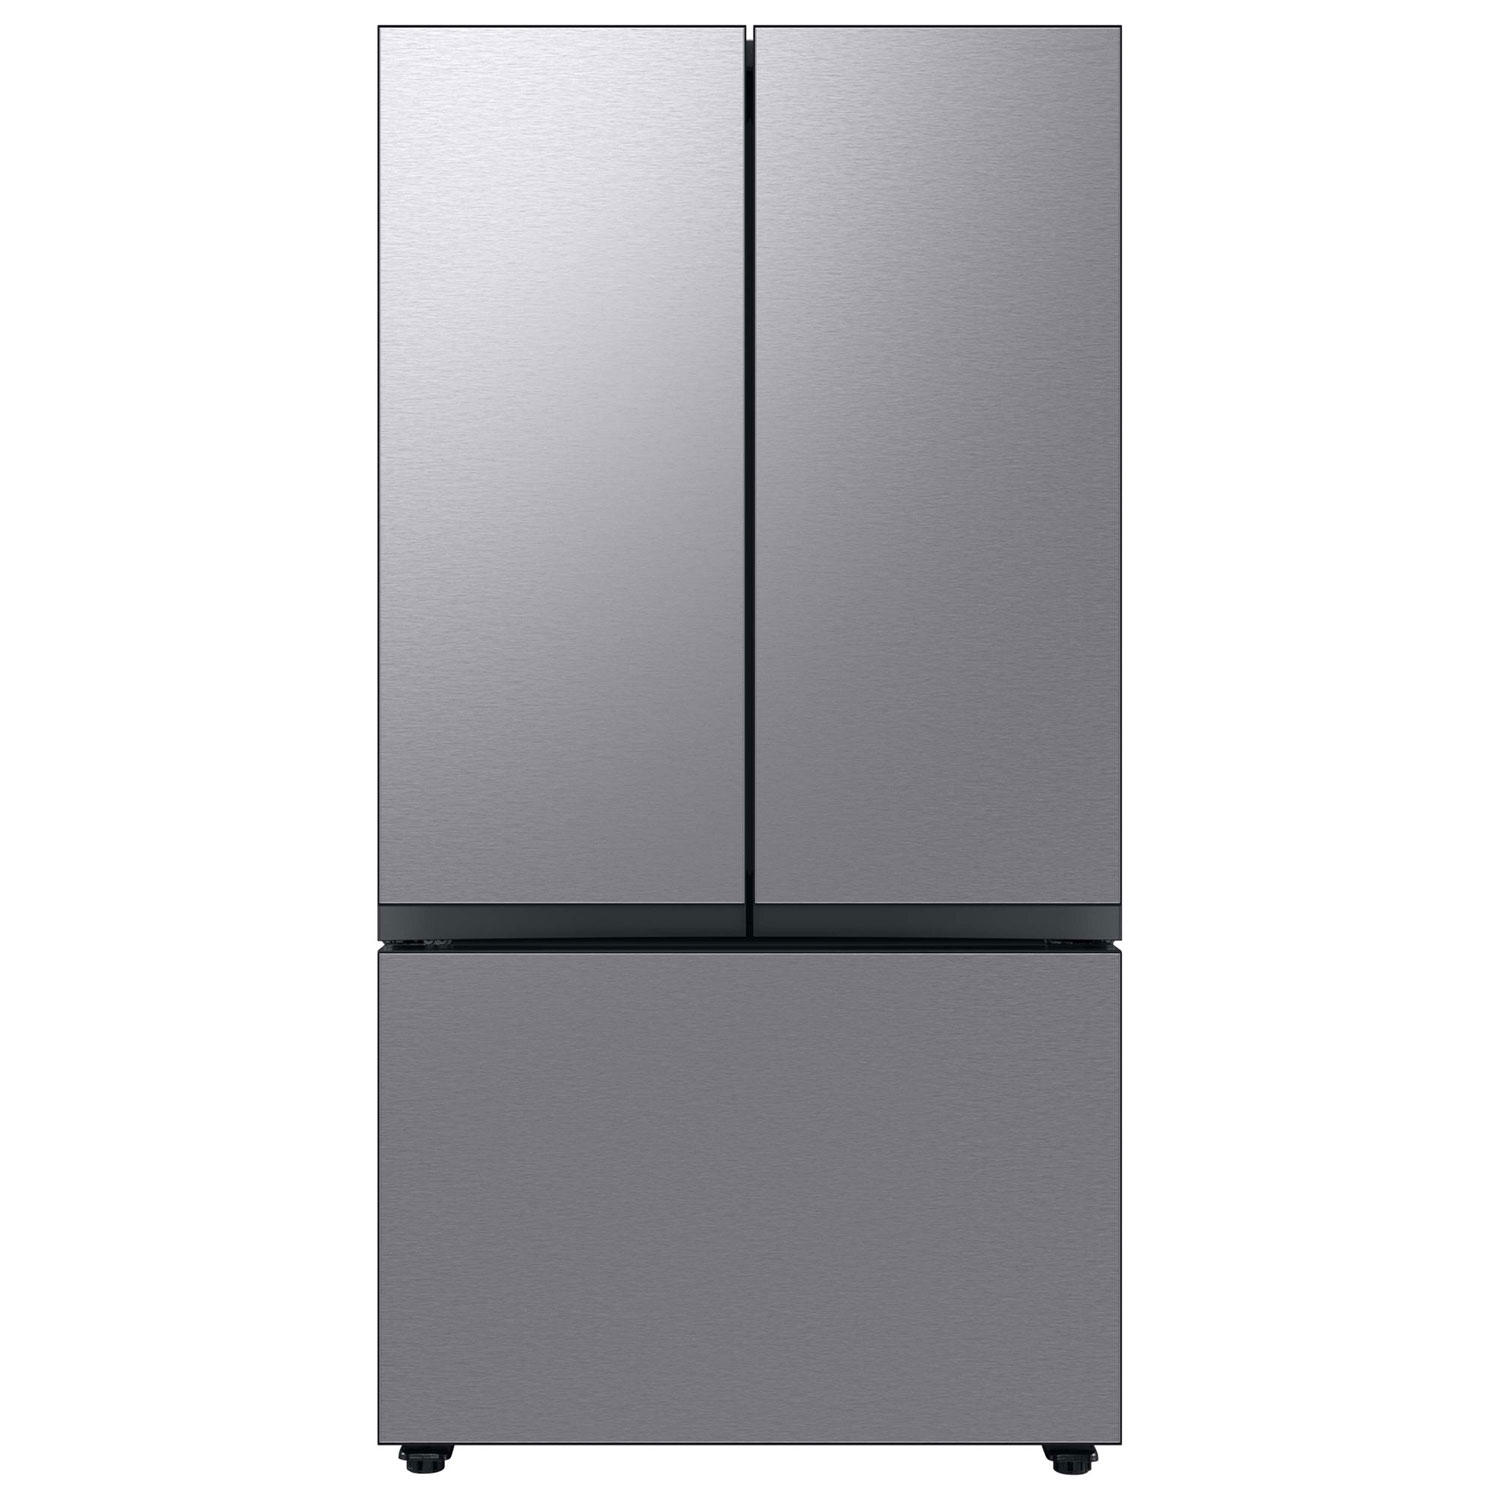 Samsung 30 cu. ft. Smart BESPOKE 3-Door French-Door Refrigerator with Customizable Panel Colors and AutoFill Water Pitcher in Stainless Steel